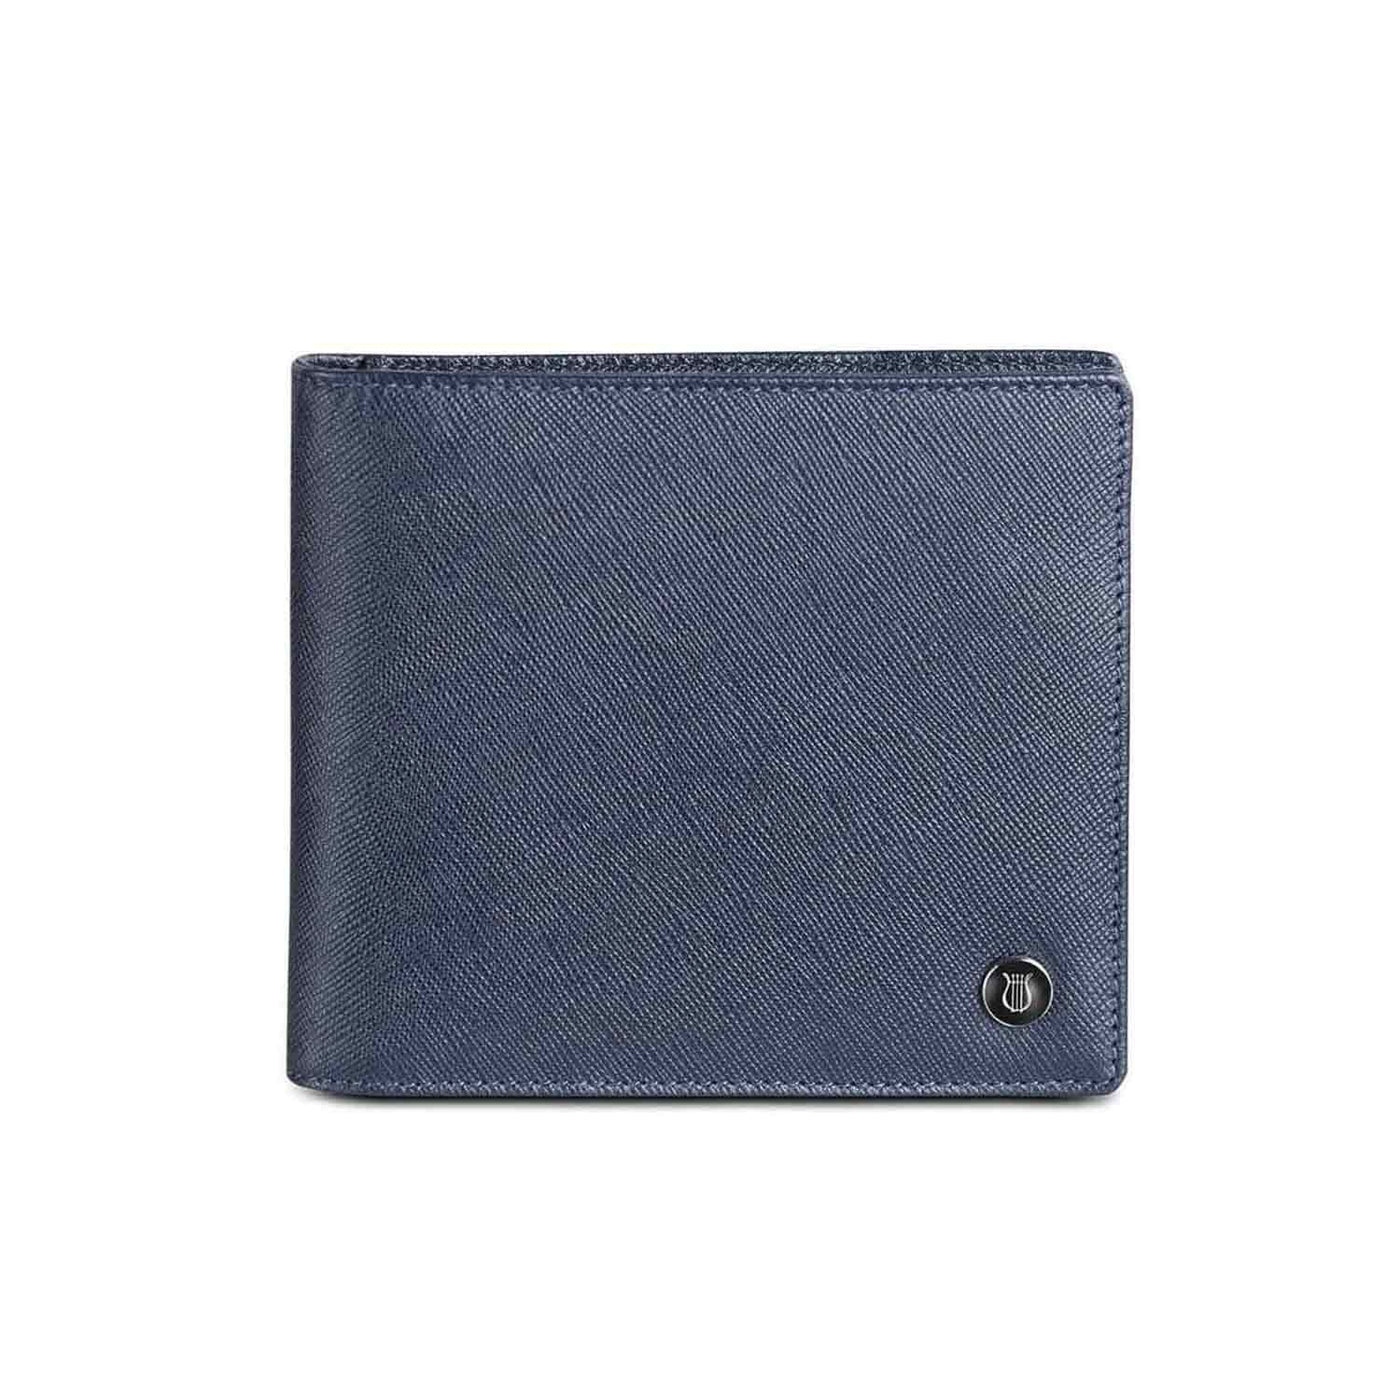 Lapis Bard Stanford Money Clip Evening 8cc Wallet with Additional Sleeve - Blue 1